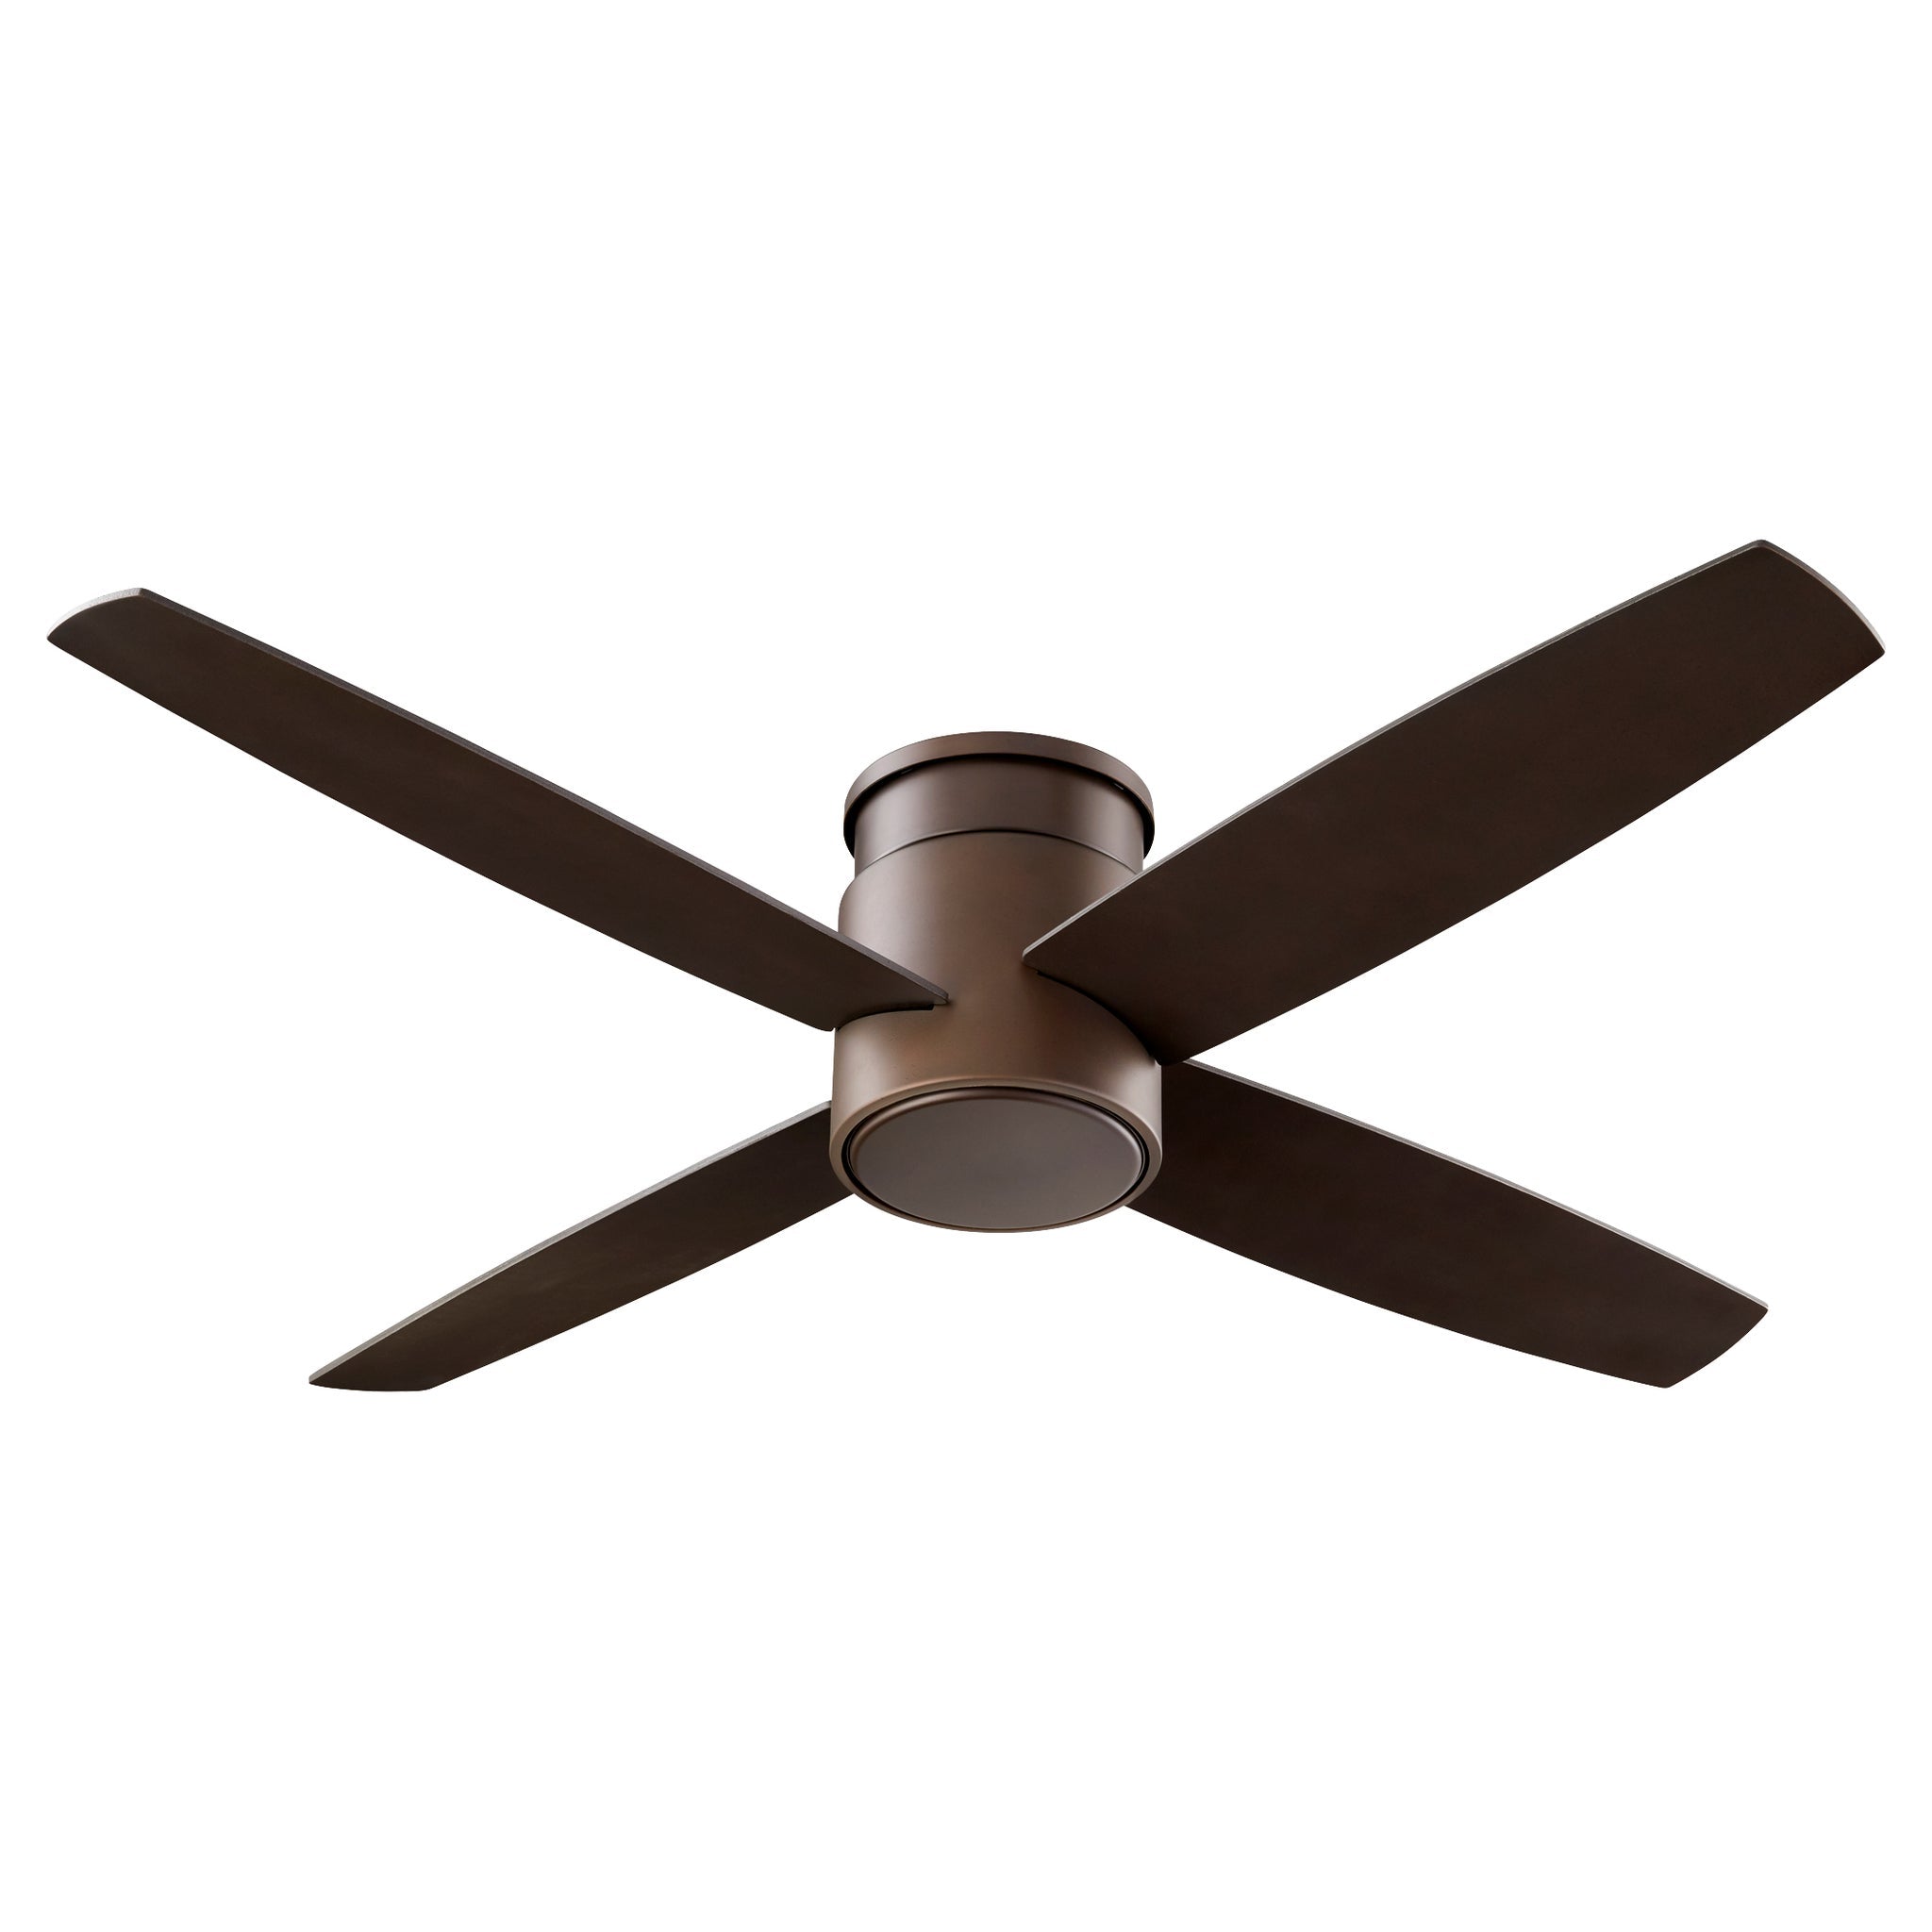 Oxygen OSLO HUGGER 52 Inch Ceiling Fan with Remote, LED Light Optional - 3-102-X